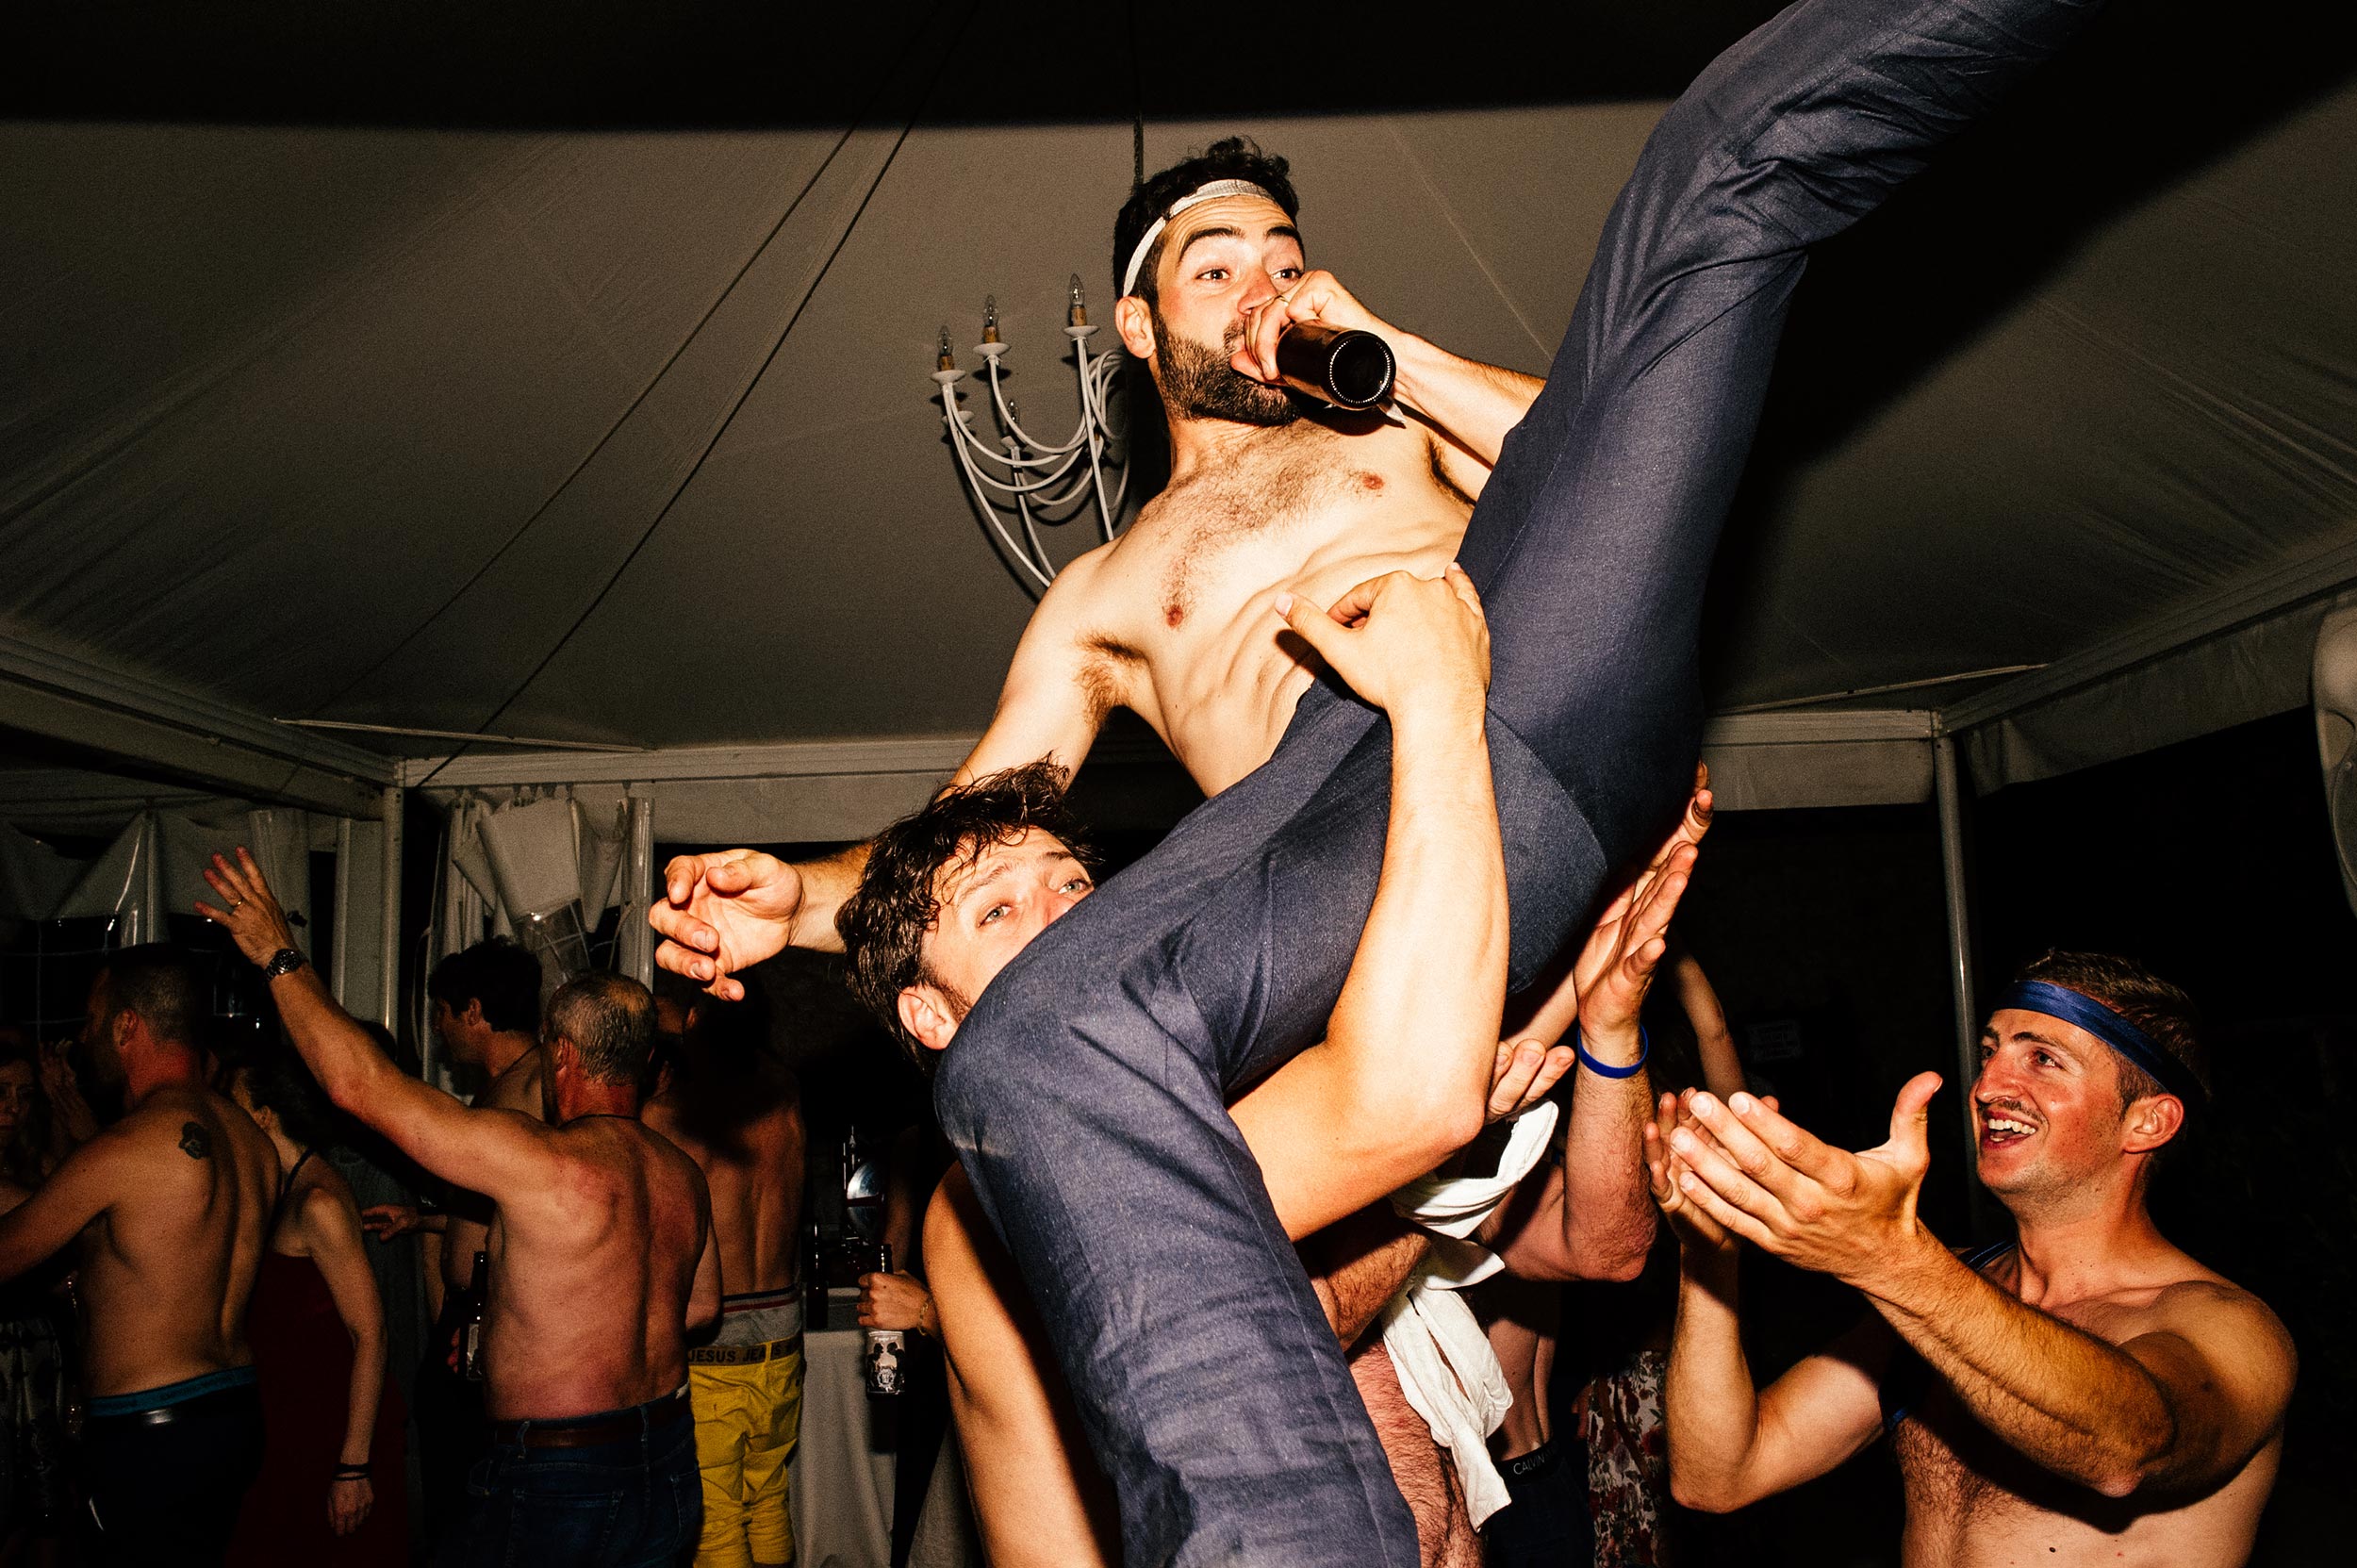 groom-being-thrown-in-the-air-naked-while-drinking-beer-during-wedding-reception-dancing.jpg